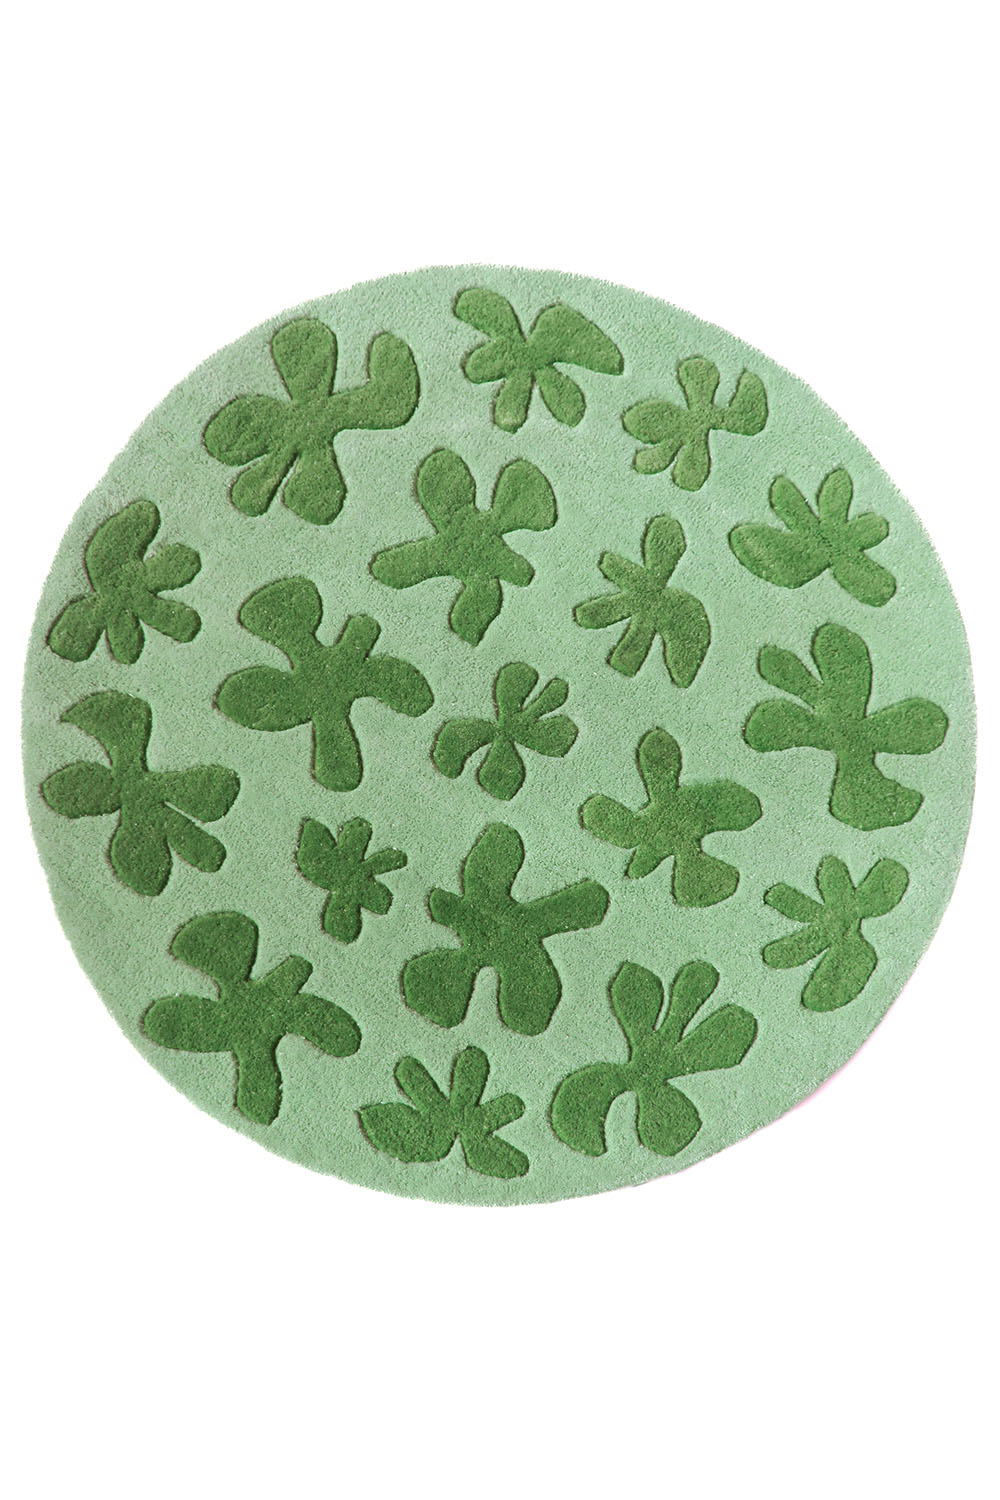 Floral Blossom Round Hand Tufted Wool Rug in Green by Jubi